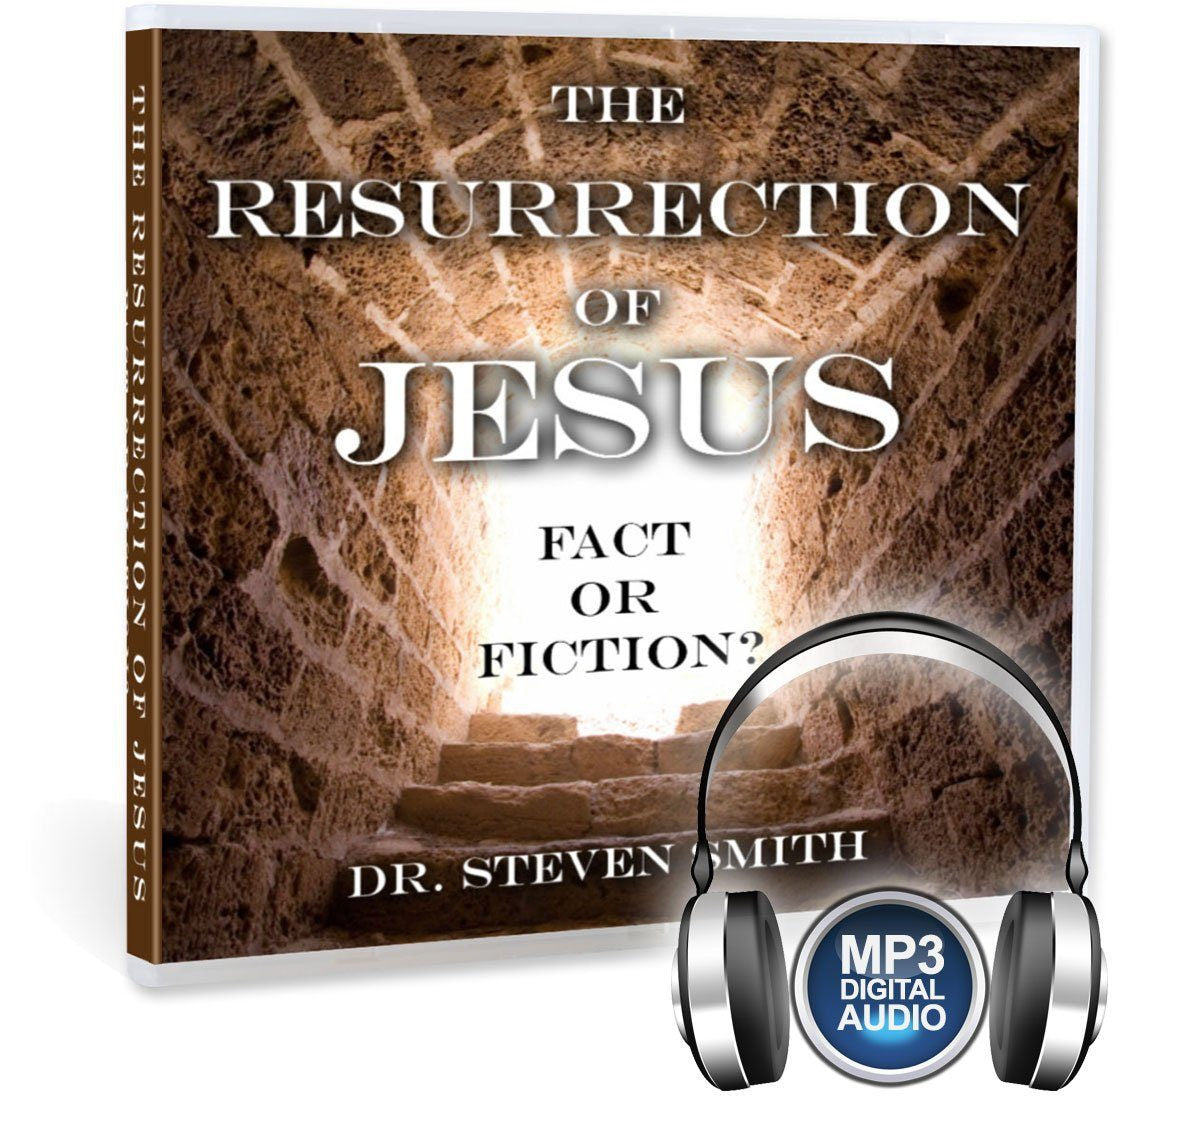 Dr. Steven Smith makes the historical case for the Resurrection as the best explanation for Jesus' empty tomb on Easter Sunday (CD).